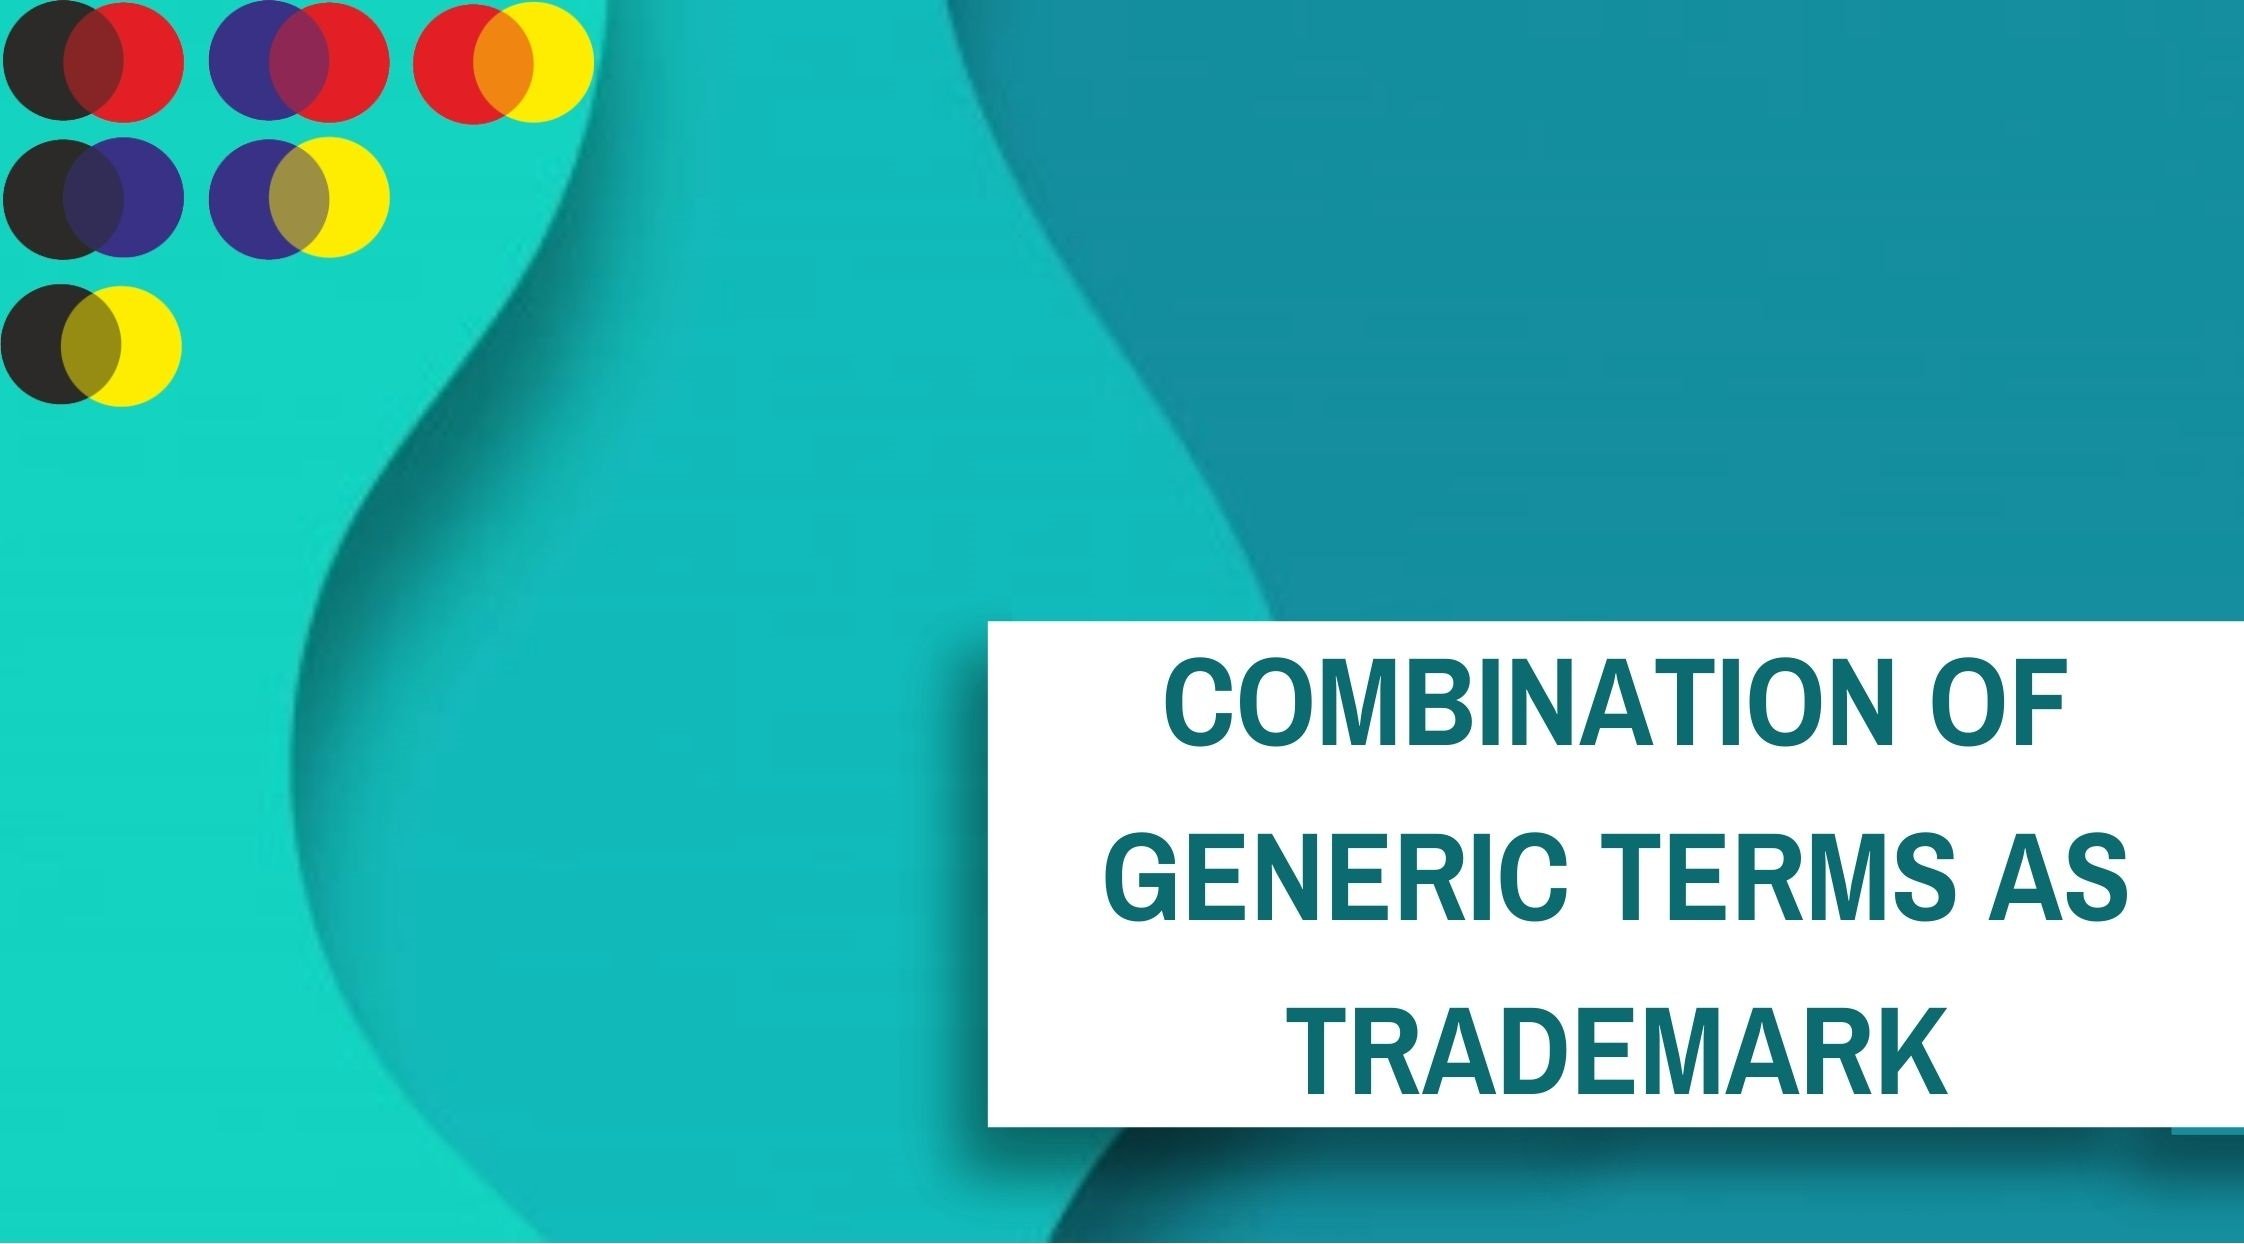 COMBINATION OF GENERIC TERMS AS TRADEMARK